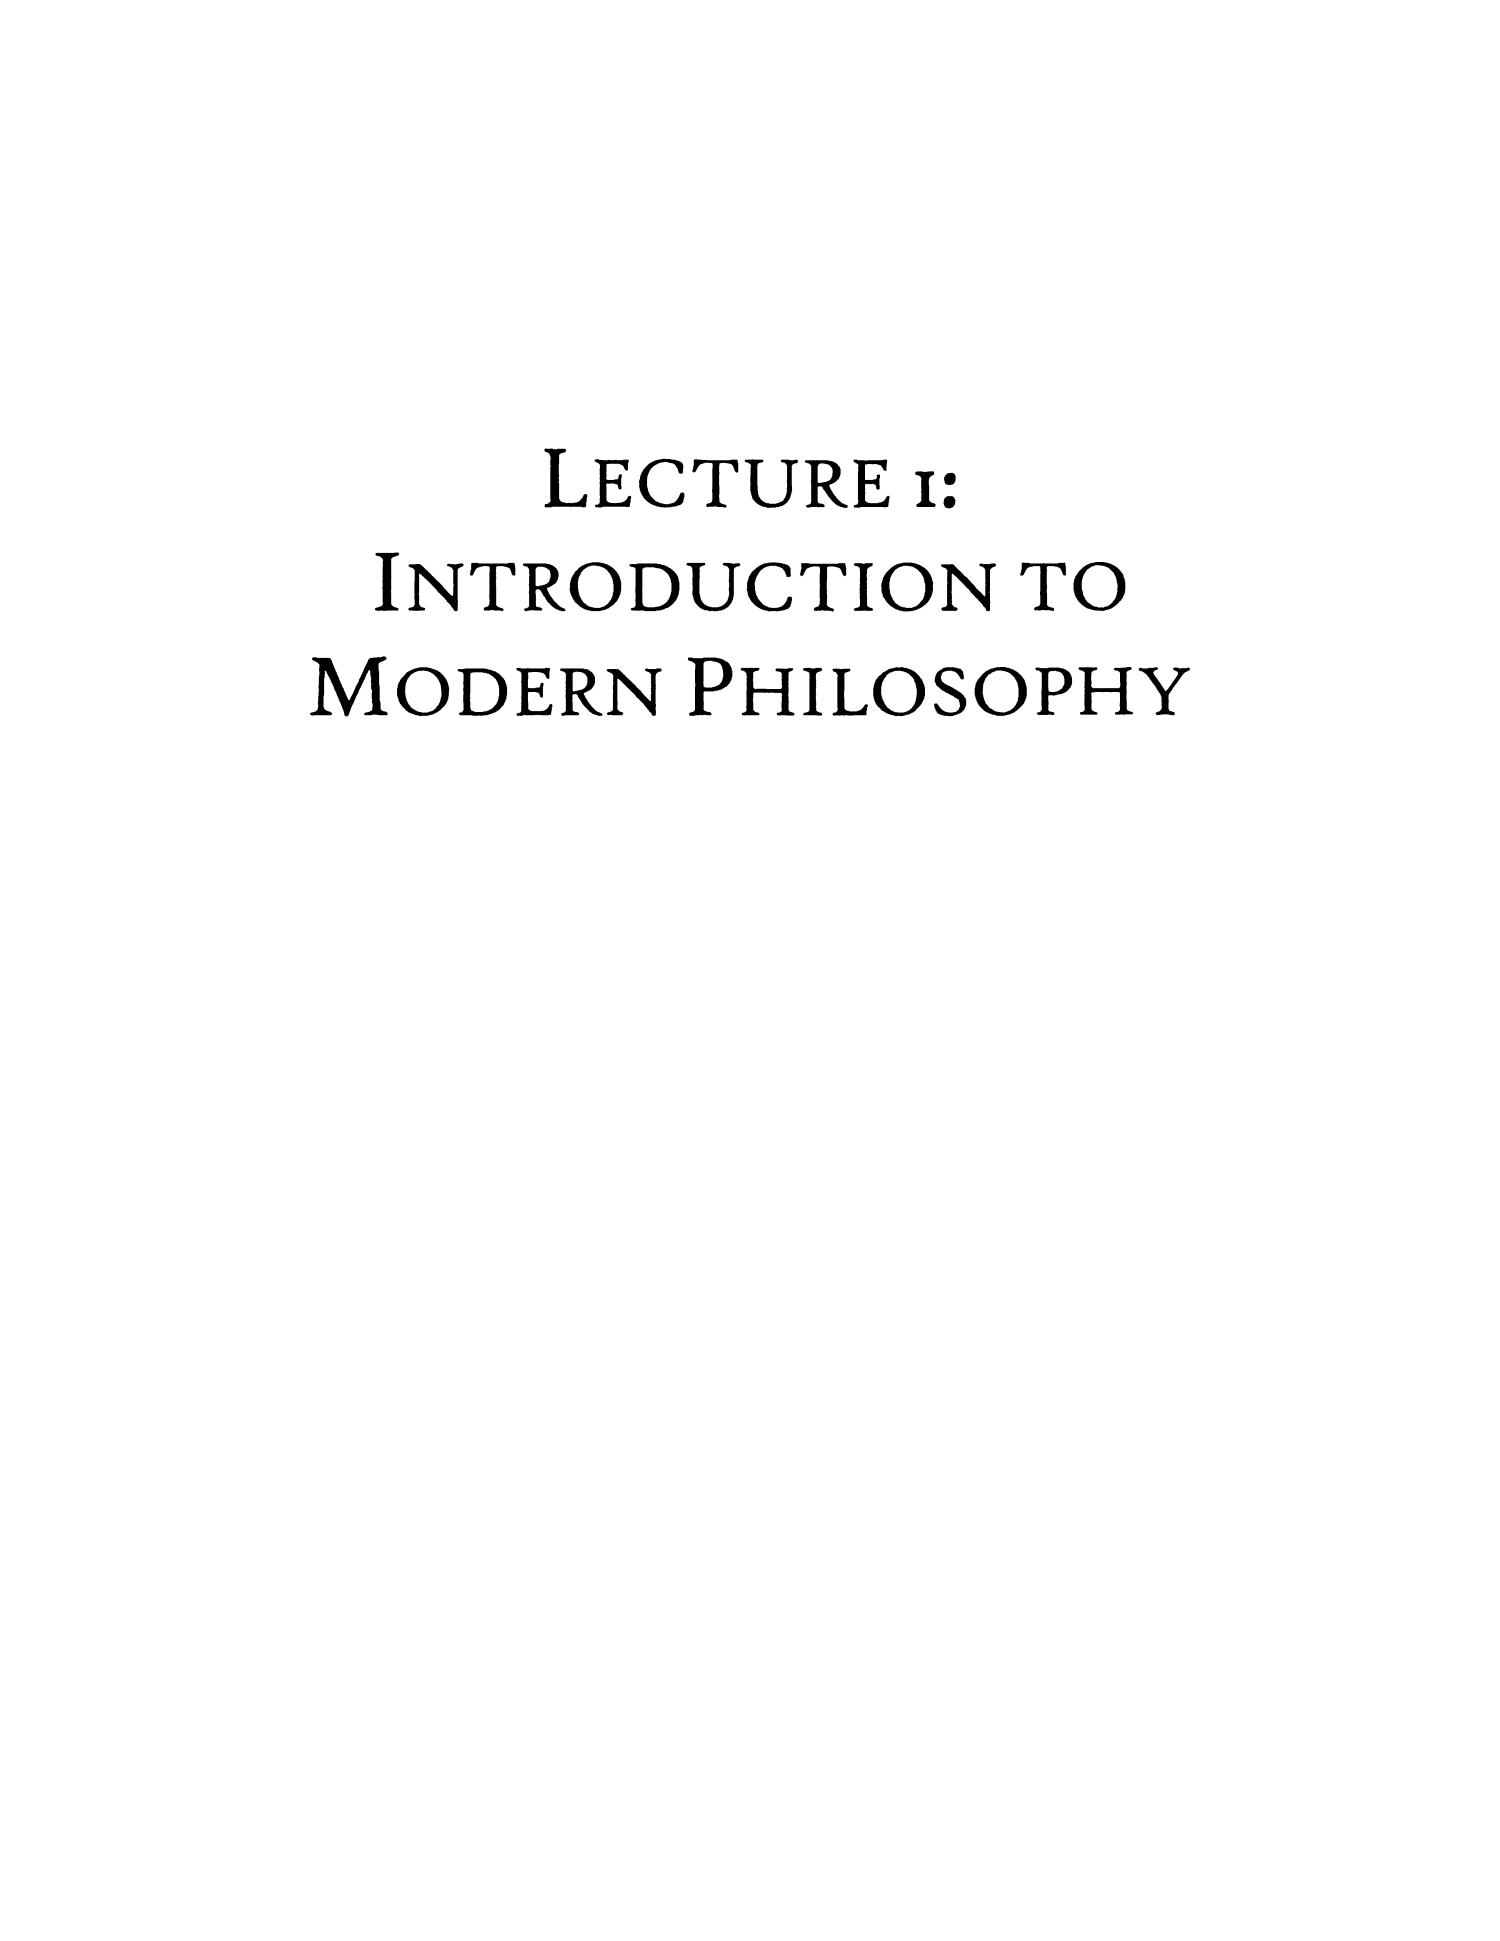 Modern Philosophy: A Study of Knowledge [Part 1]
                                                
                                                    None
                                                